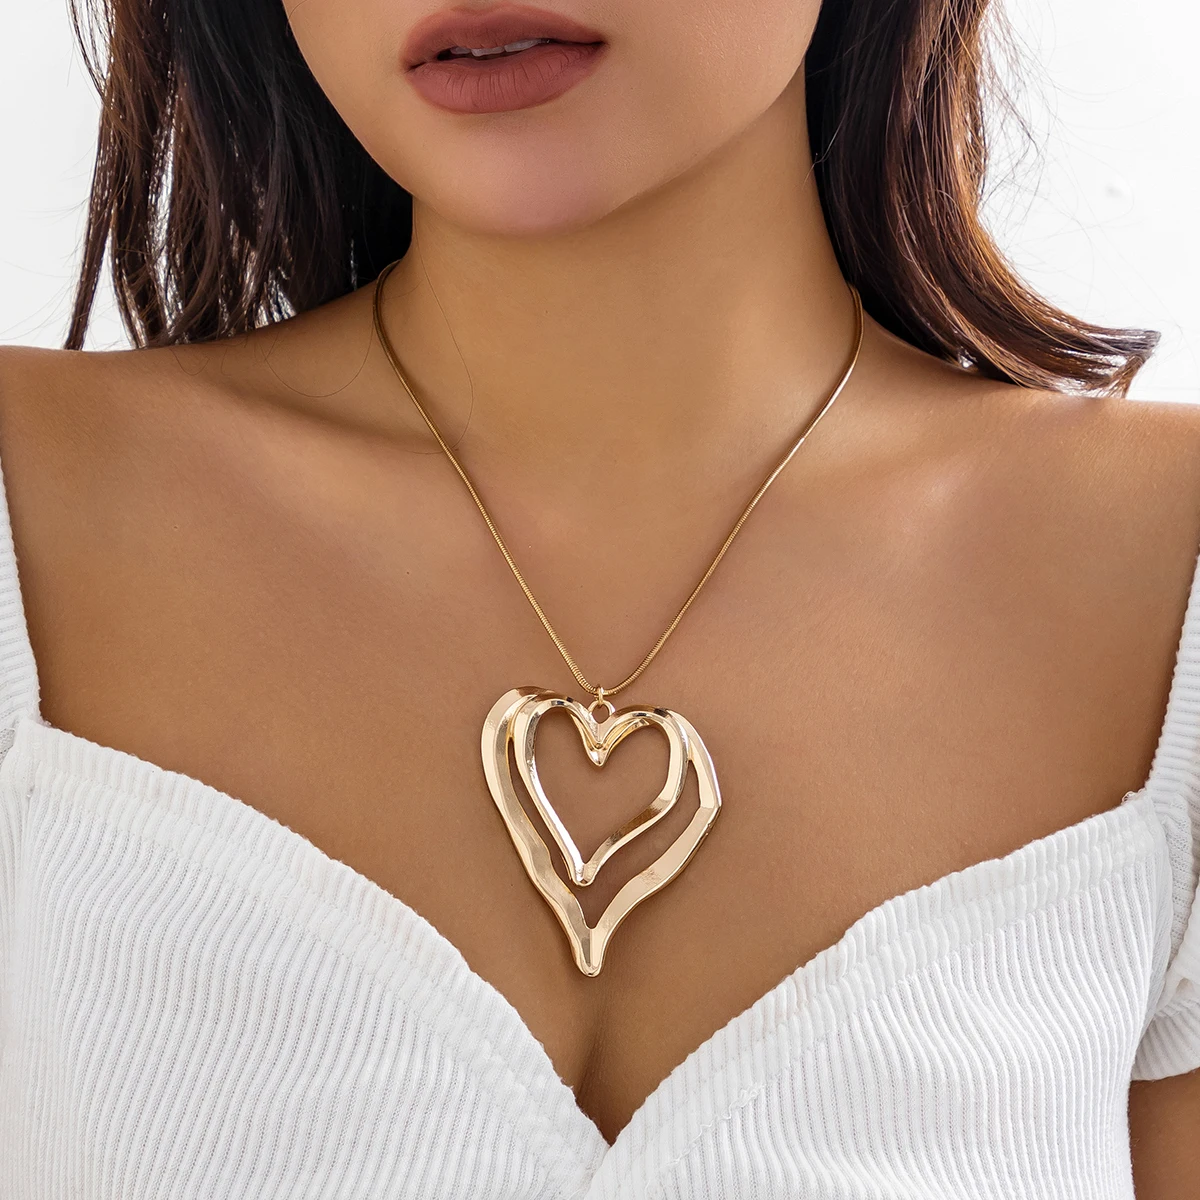 

Lacteo Trendy Double Layered Irregular Heart Pendant Necklace for Women Thin Snake Chain Chokers Girls Party Collar Jewelry Gift